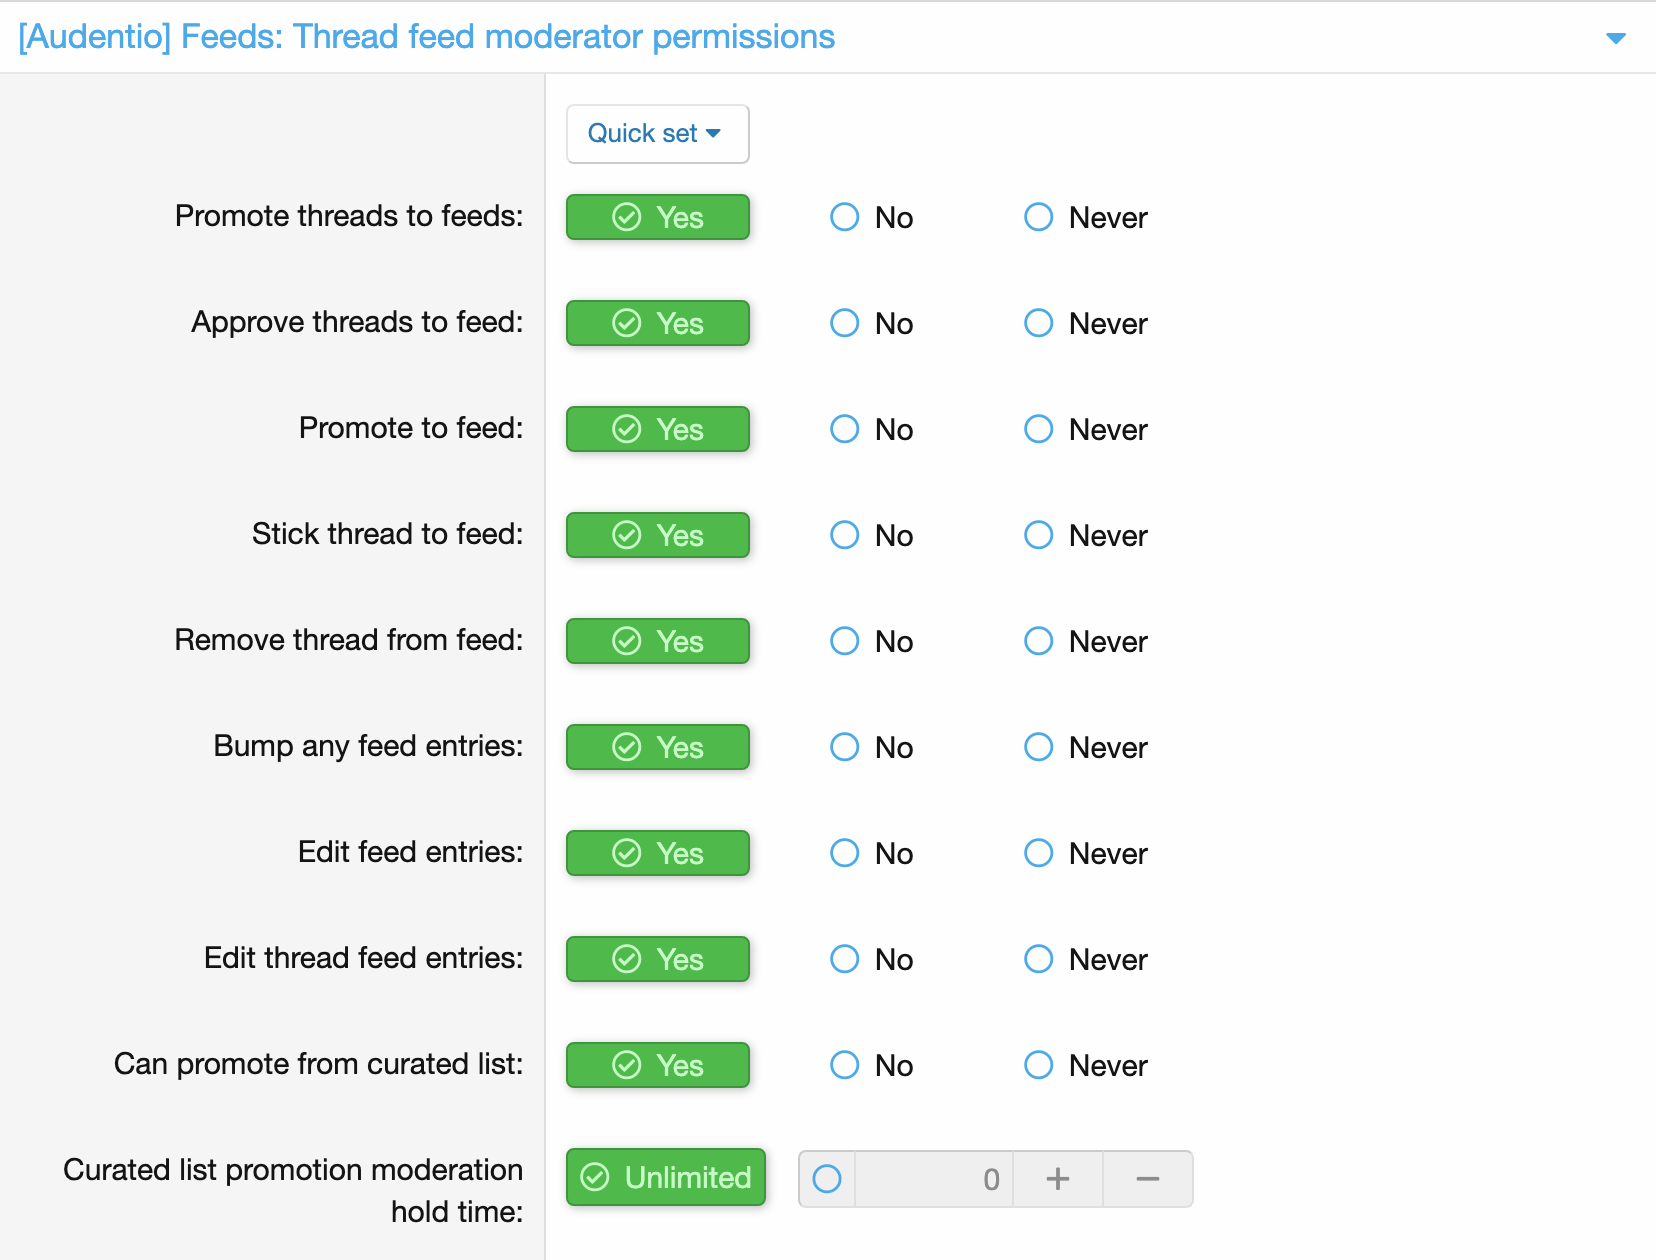 Preview of the thread feed permissions